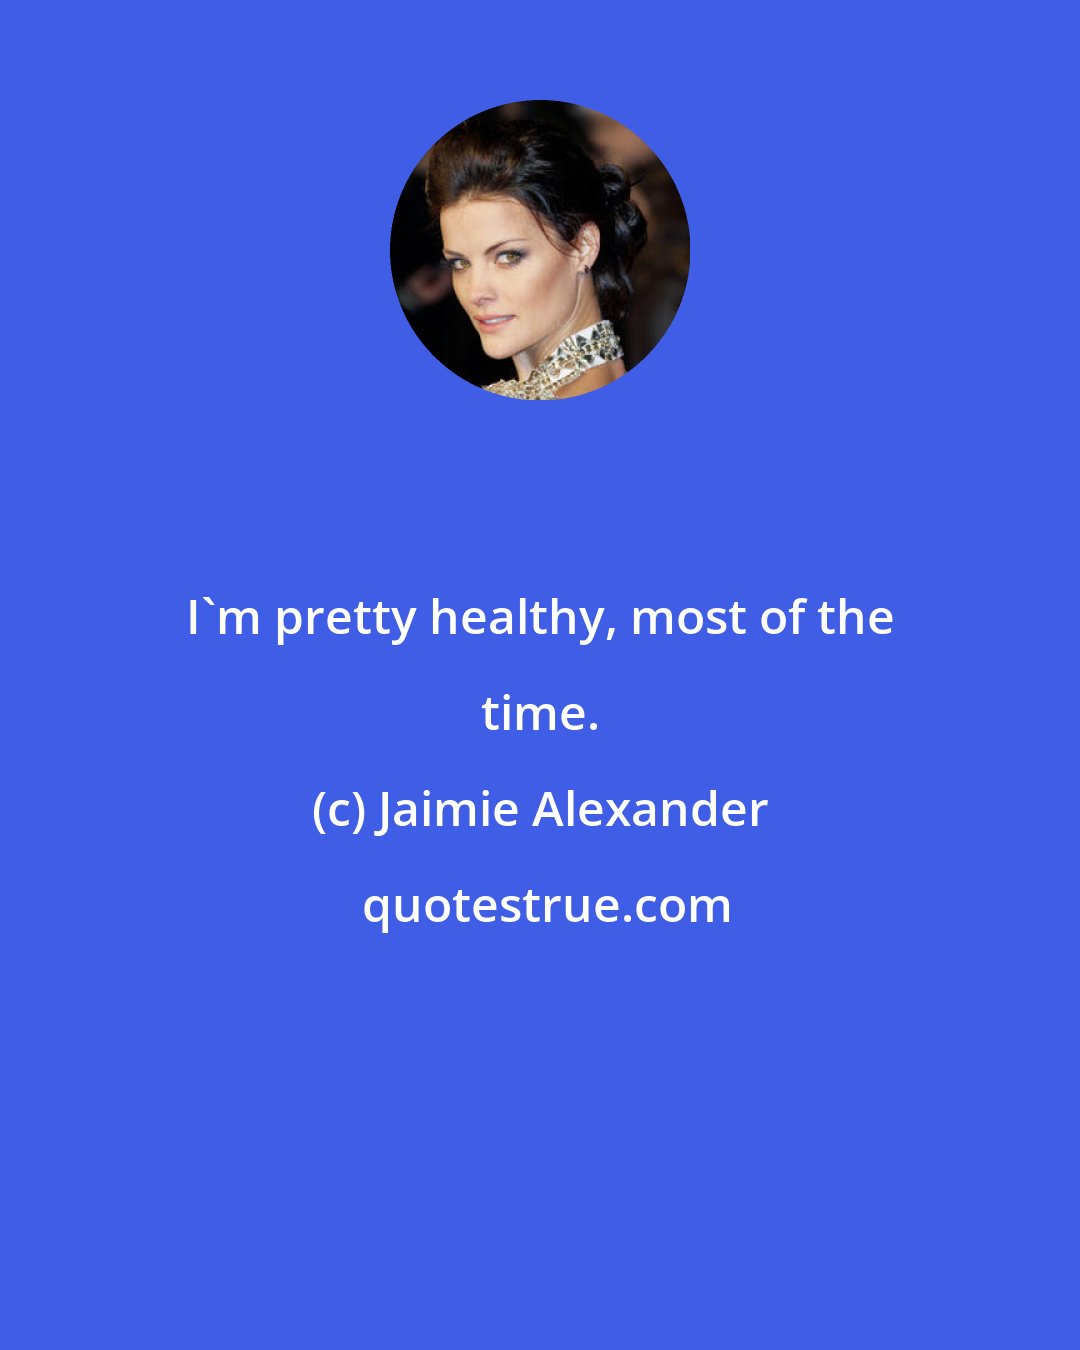 Jaimie Alexander: I'm pretty healthy, most of the time.